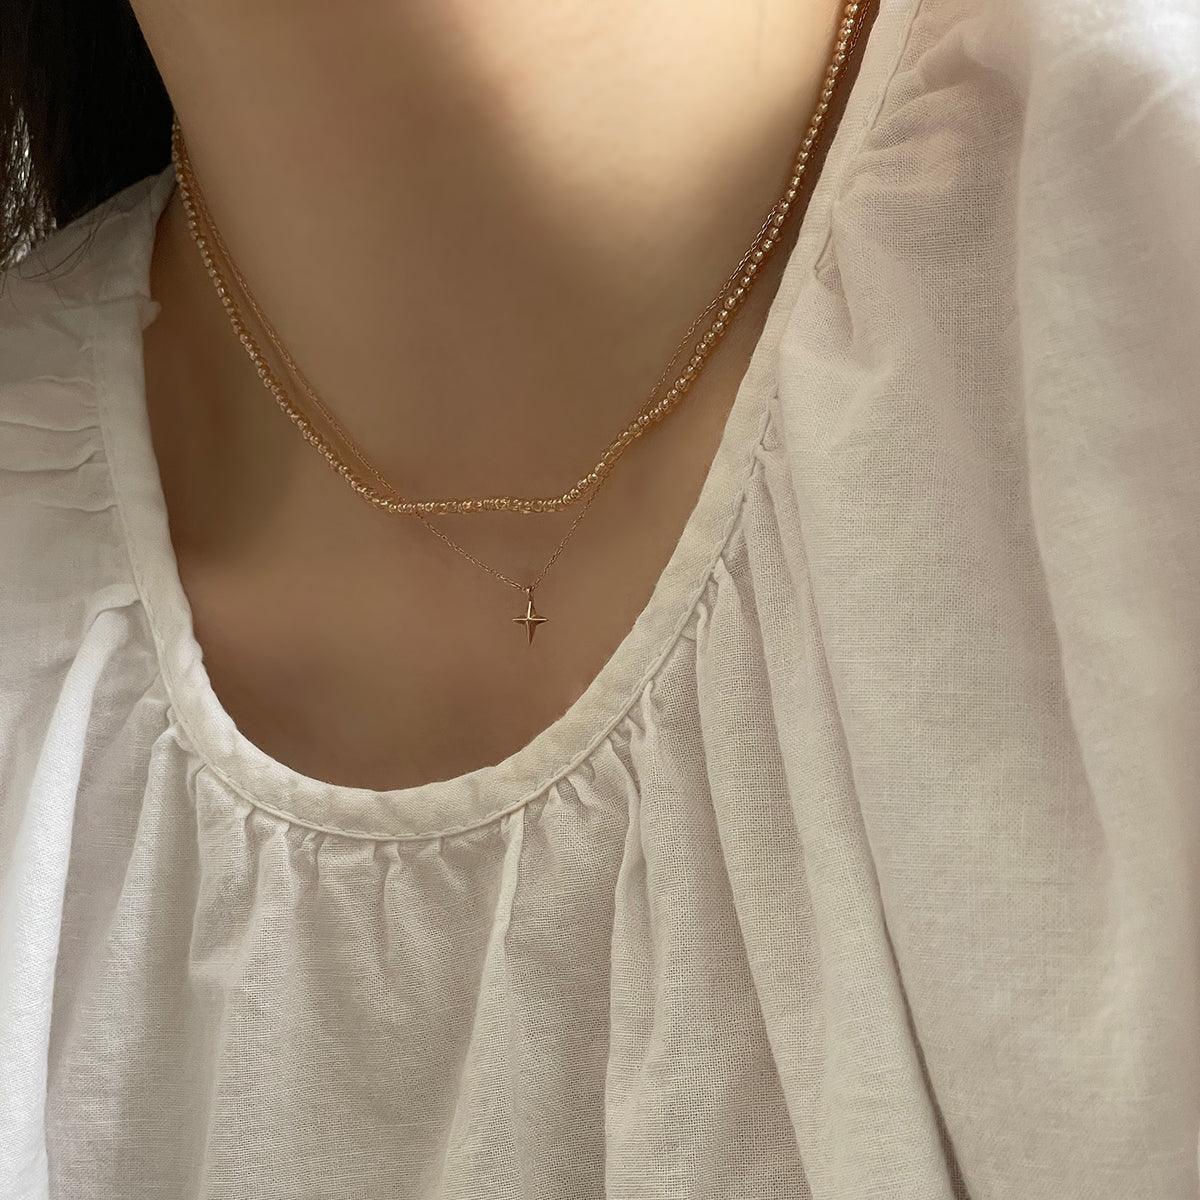 [925 Silver]スピリットネックレス necklace 10000won 